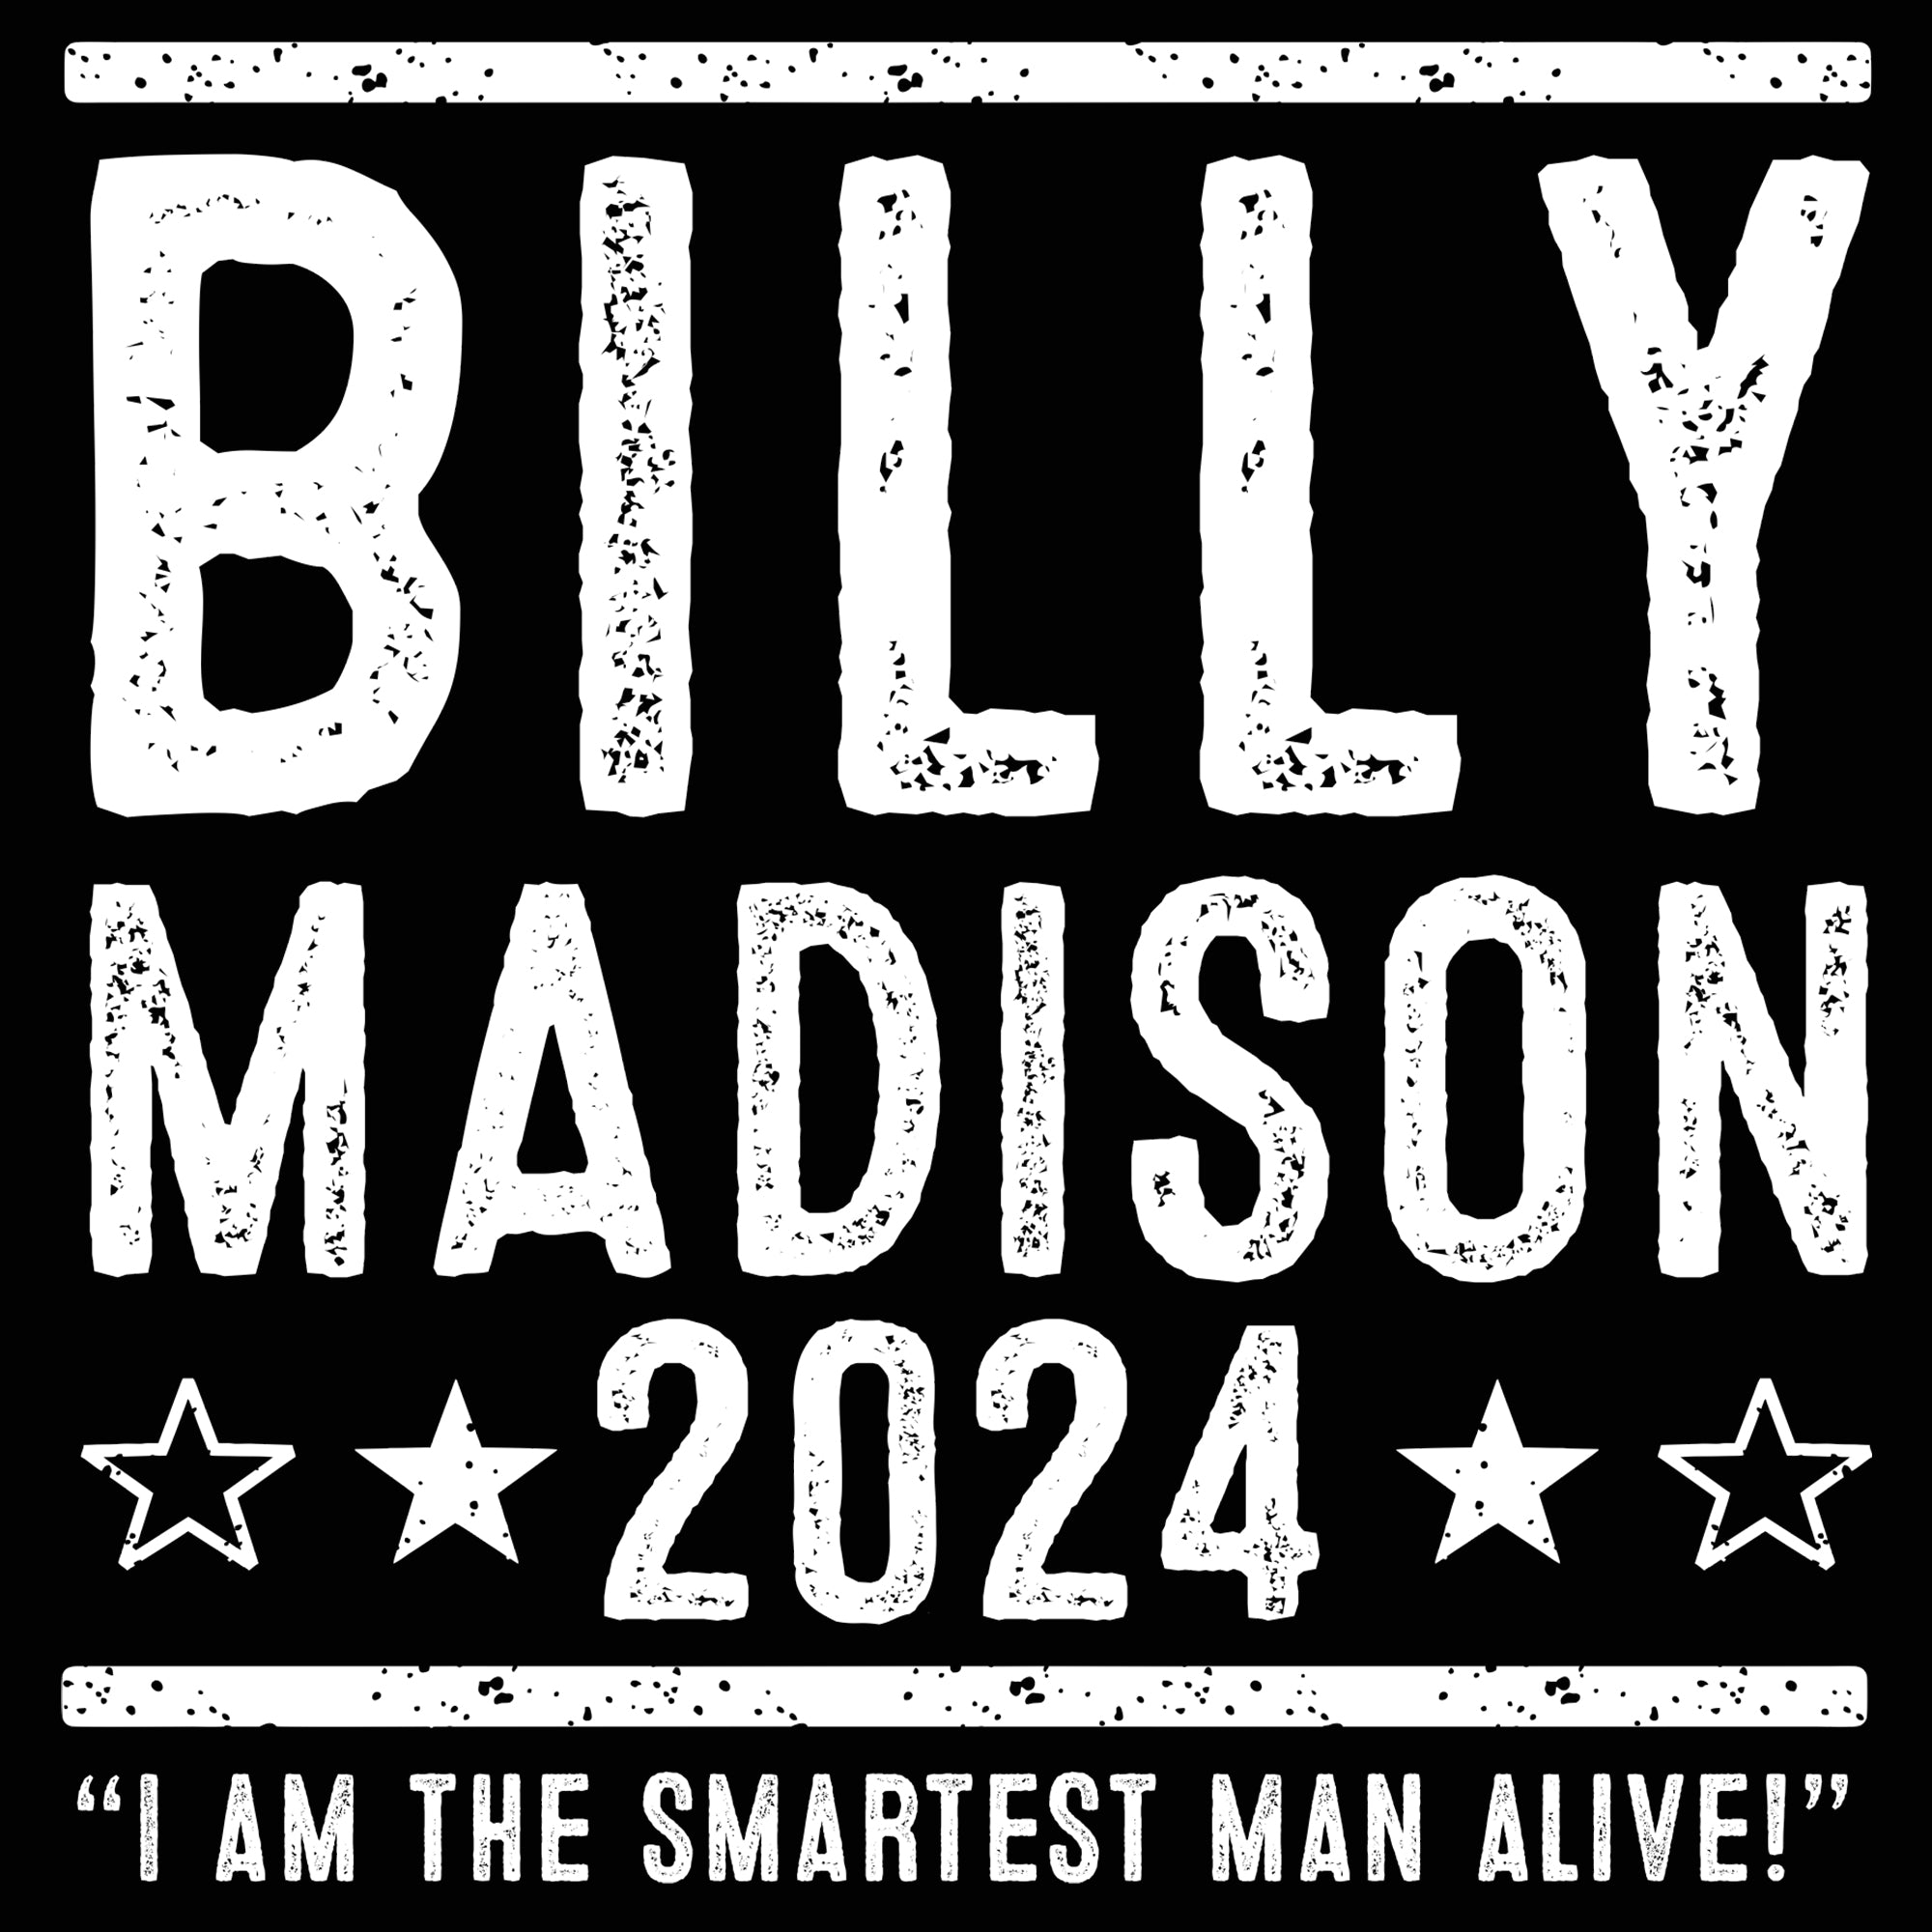 Billy Madison 2024 Election